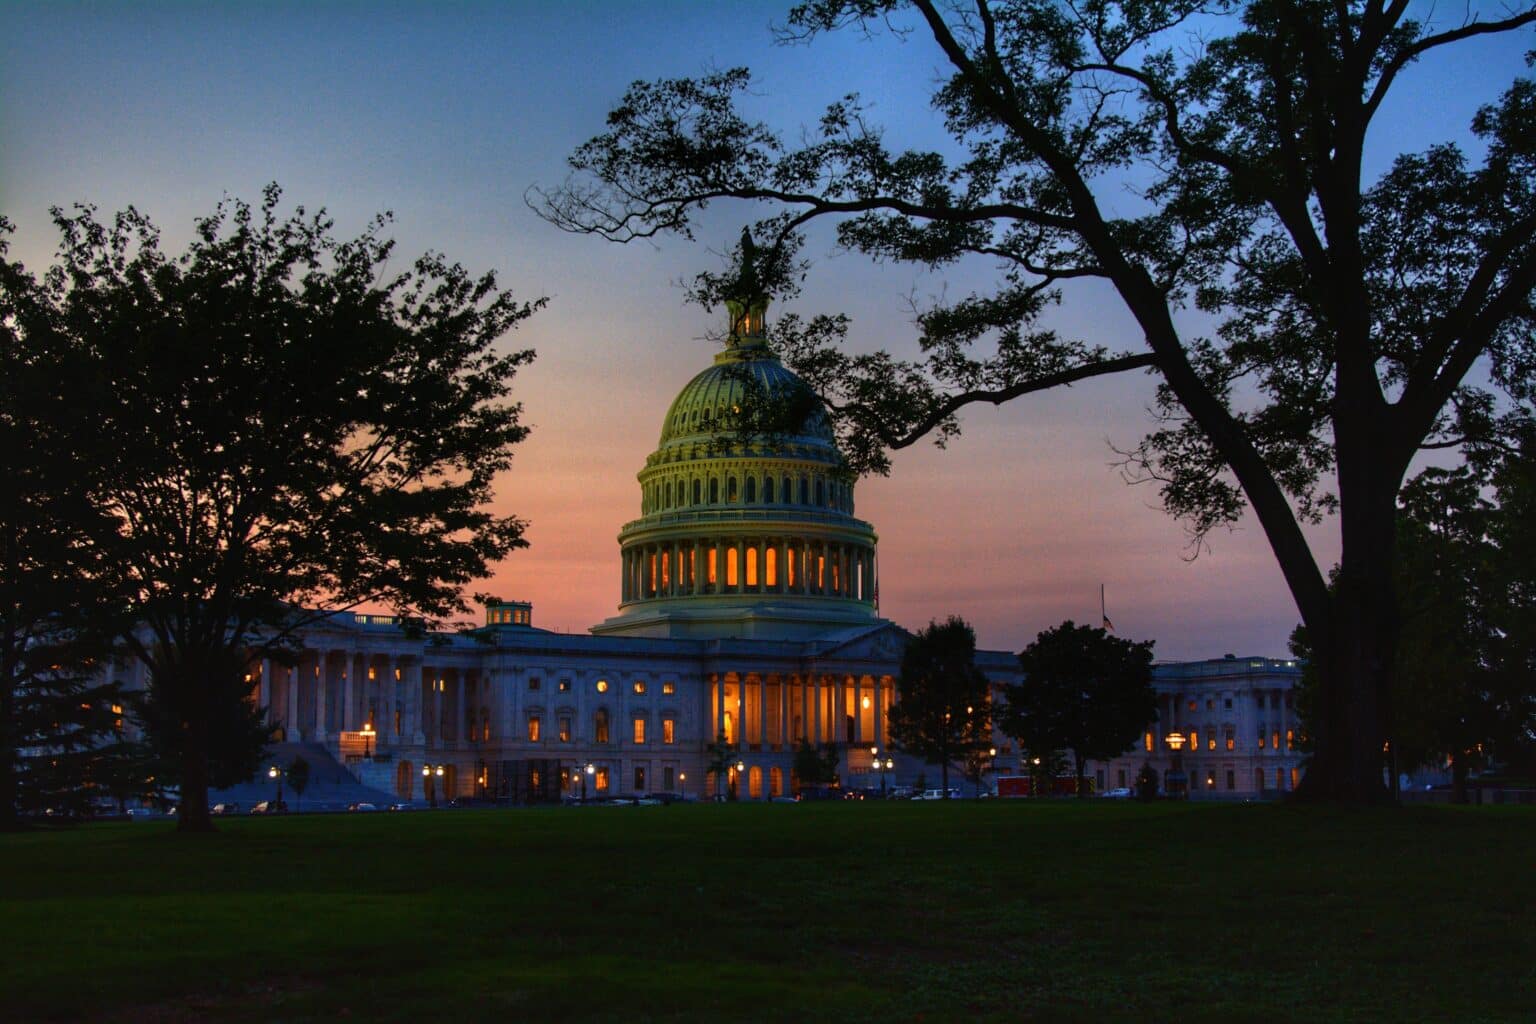 Congress Photo by MIKE STOLL on Unsplash